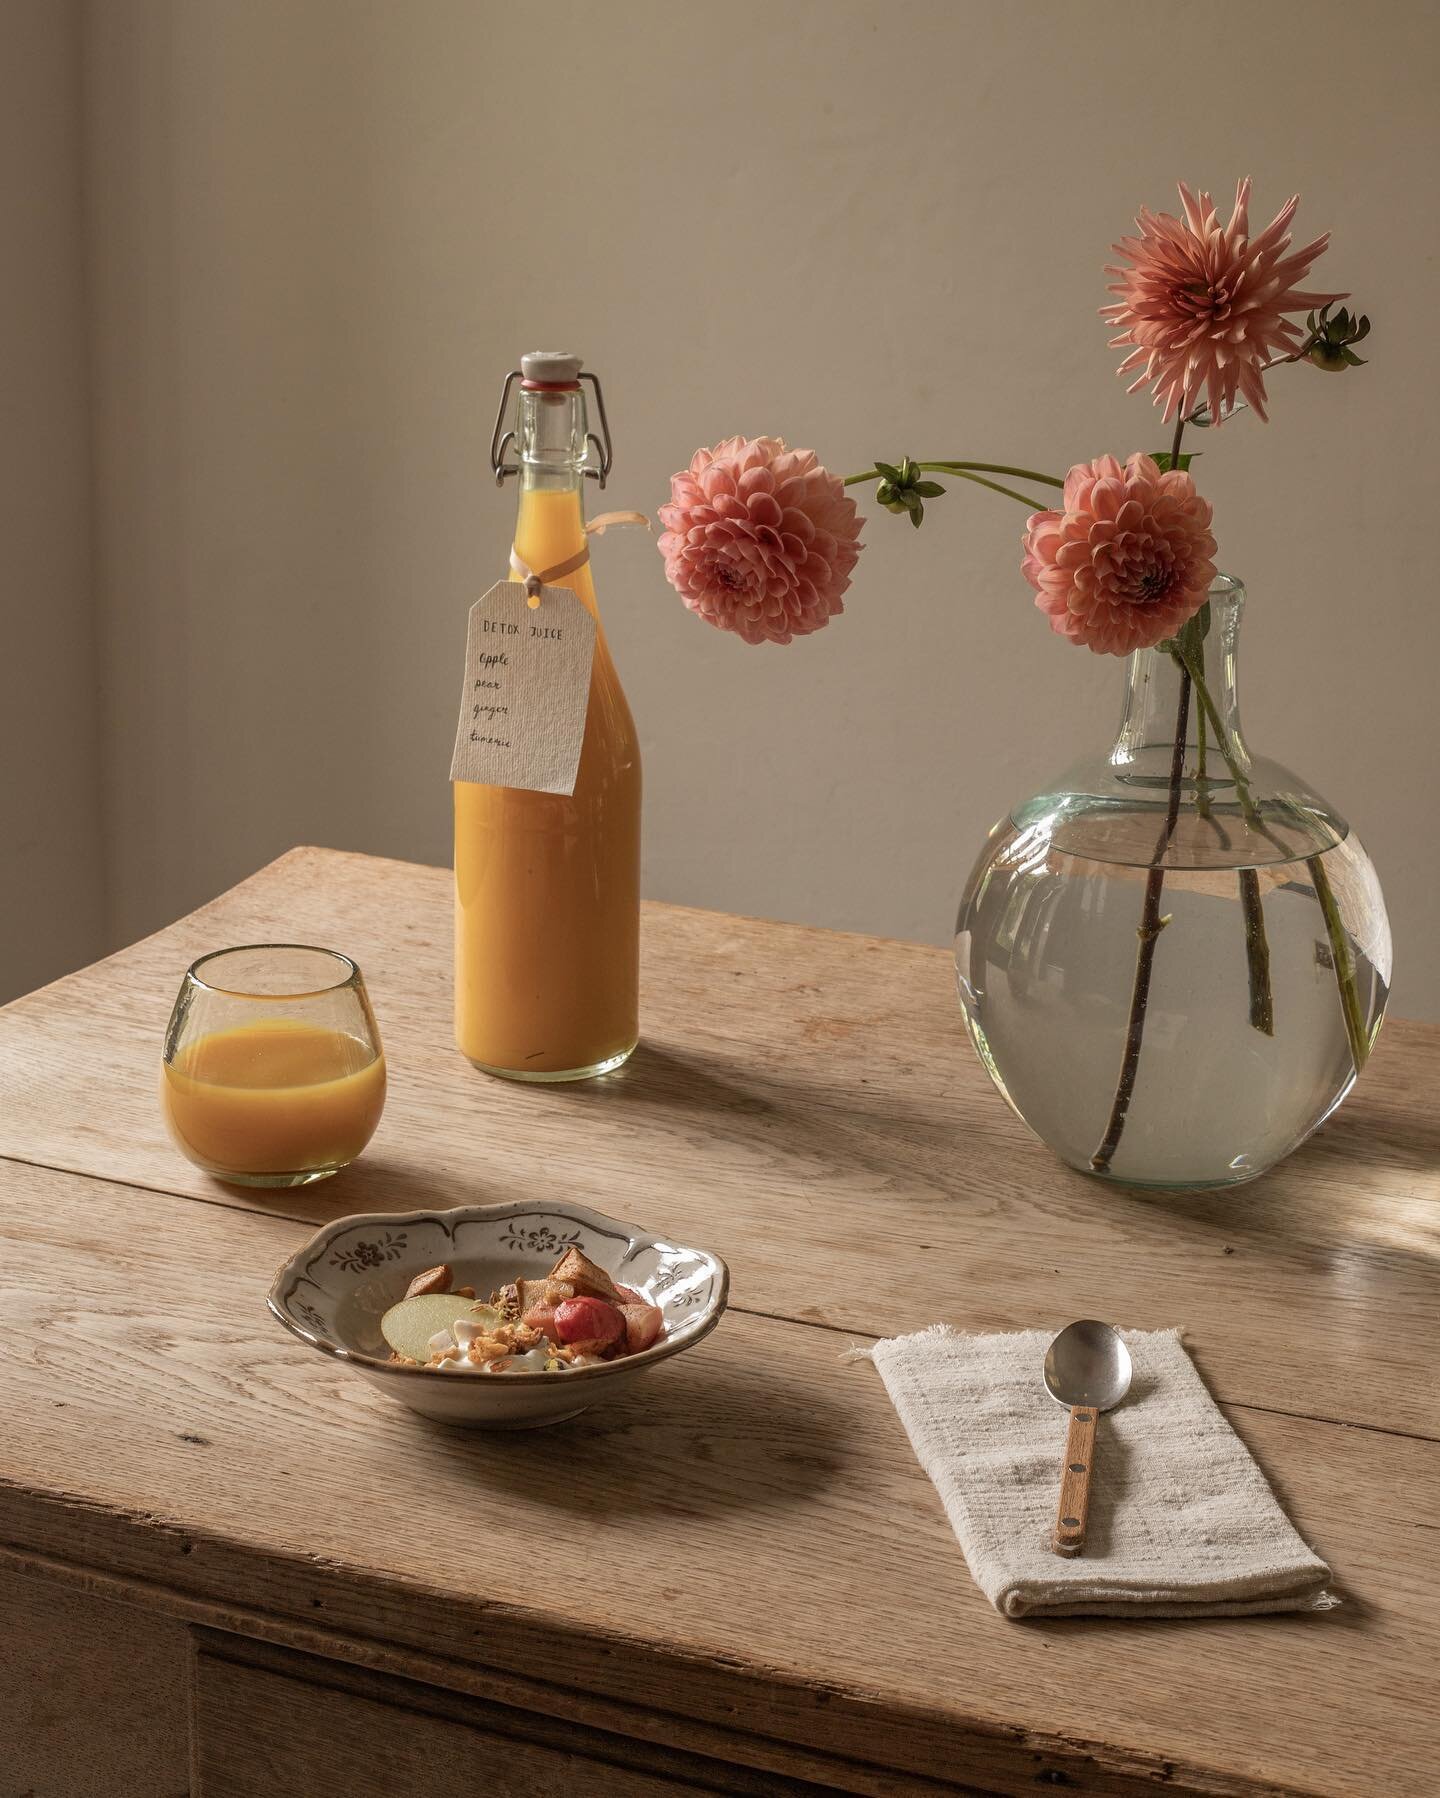 Apples &amp; pears, turmeric &amp; ginger spice🍐🧡🫚 
Pretty, clean &amp; detox keen💫
A moment of warming freshness &amp; peachy pompom dahlia dancing for a recent project, Verity developed beautiful seasonal recipes for us to shift into autumn wit